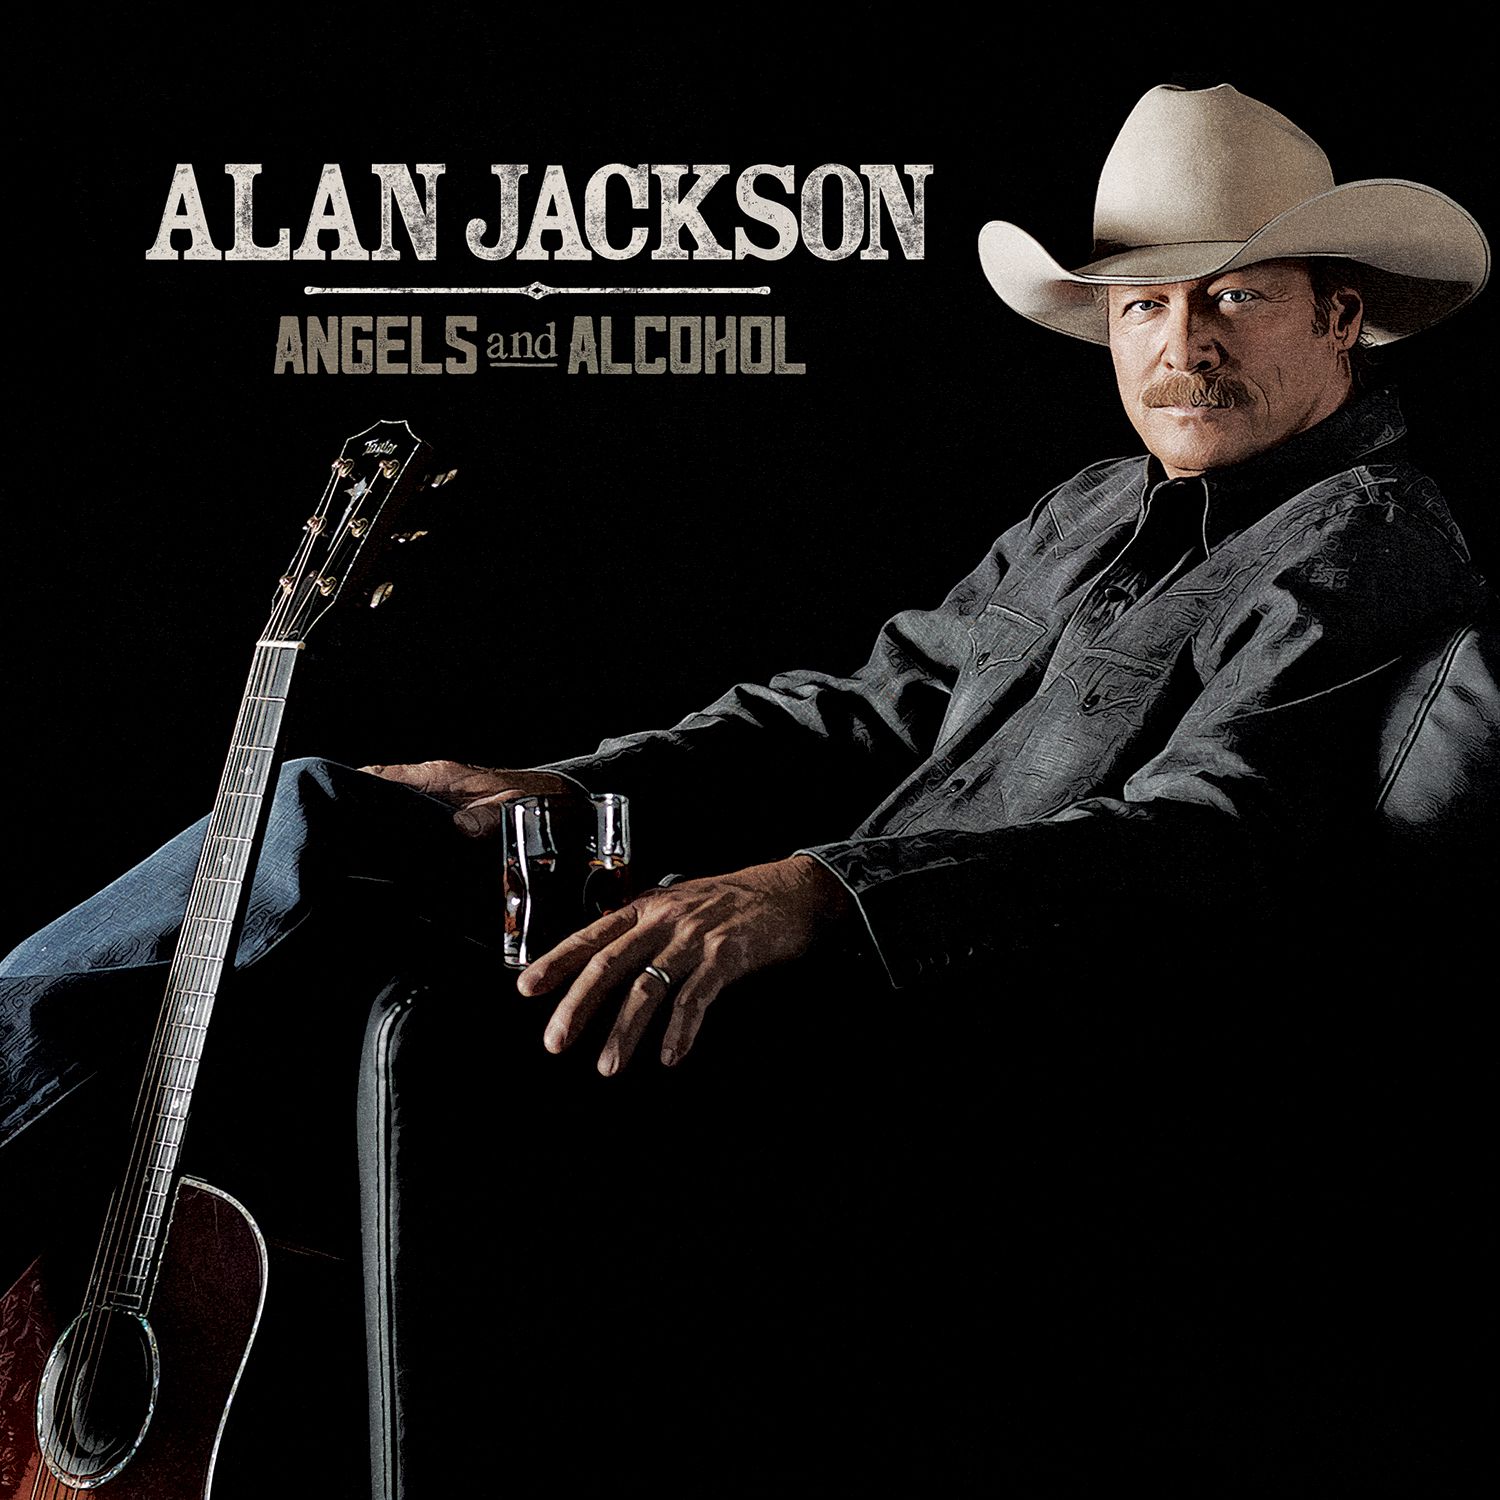 ALAN JACKSON LAUNCHES “ANGELS AND ALCOHOL” WITH MAJOR MEDIA BLITZ